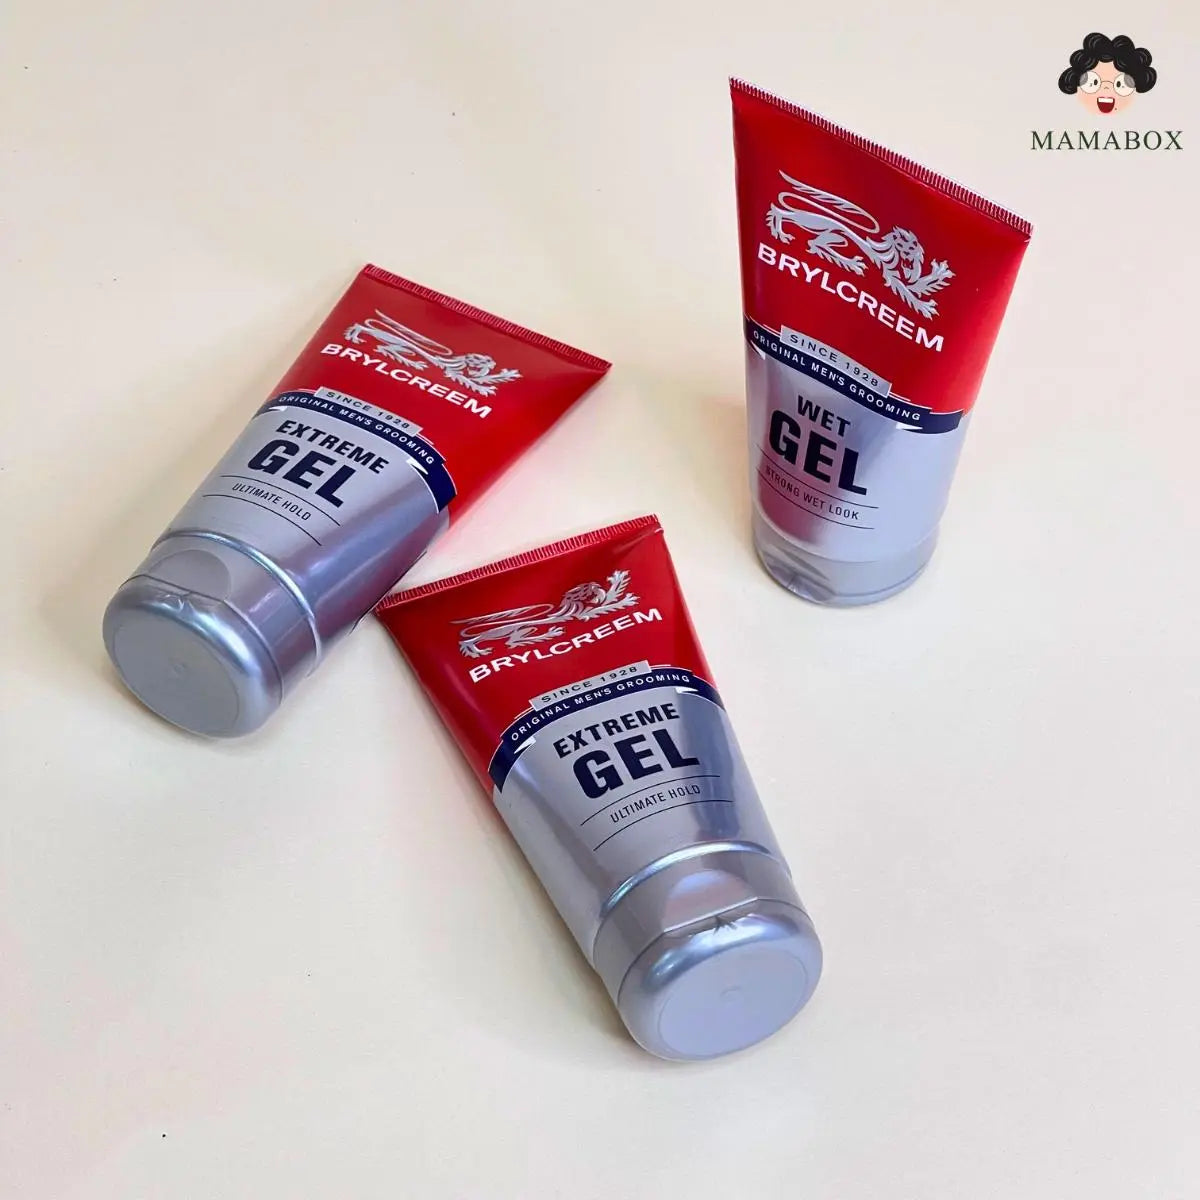 Brylcreem Style Wet Look/Extreme Gel 150ml x 2 - mamabox.sg